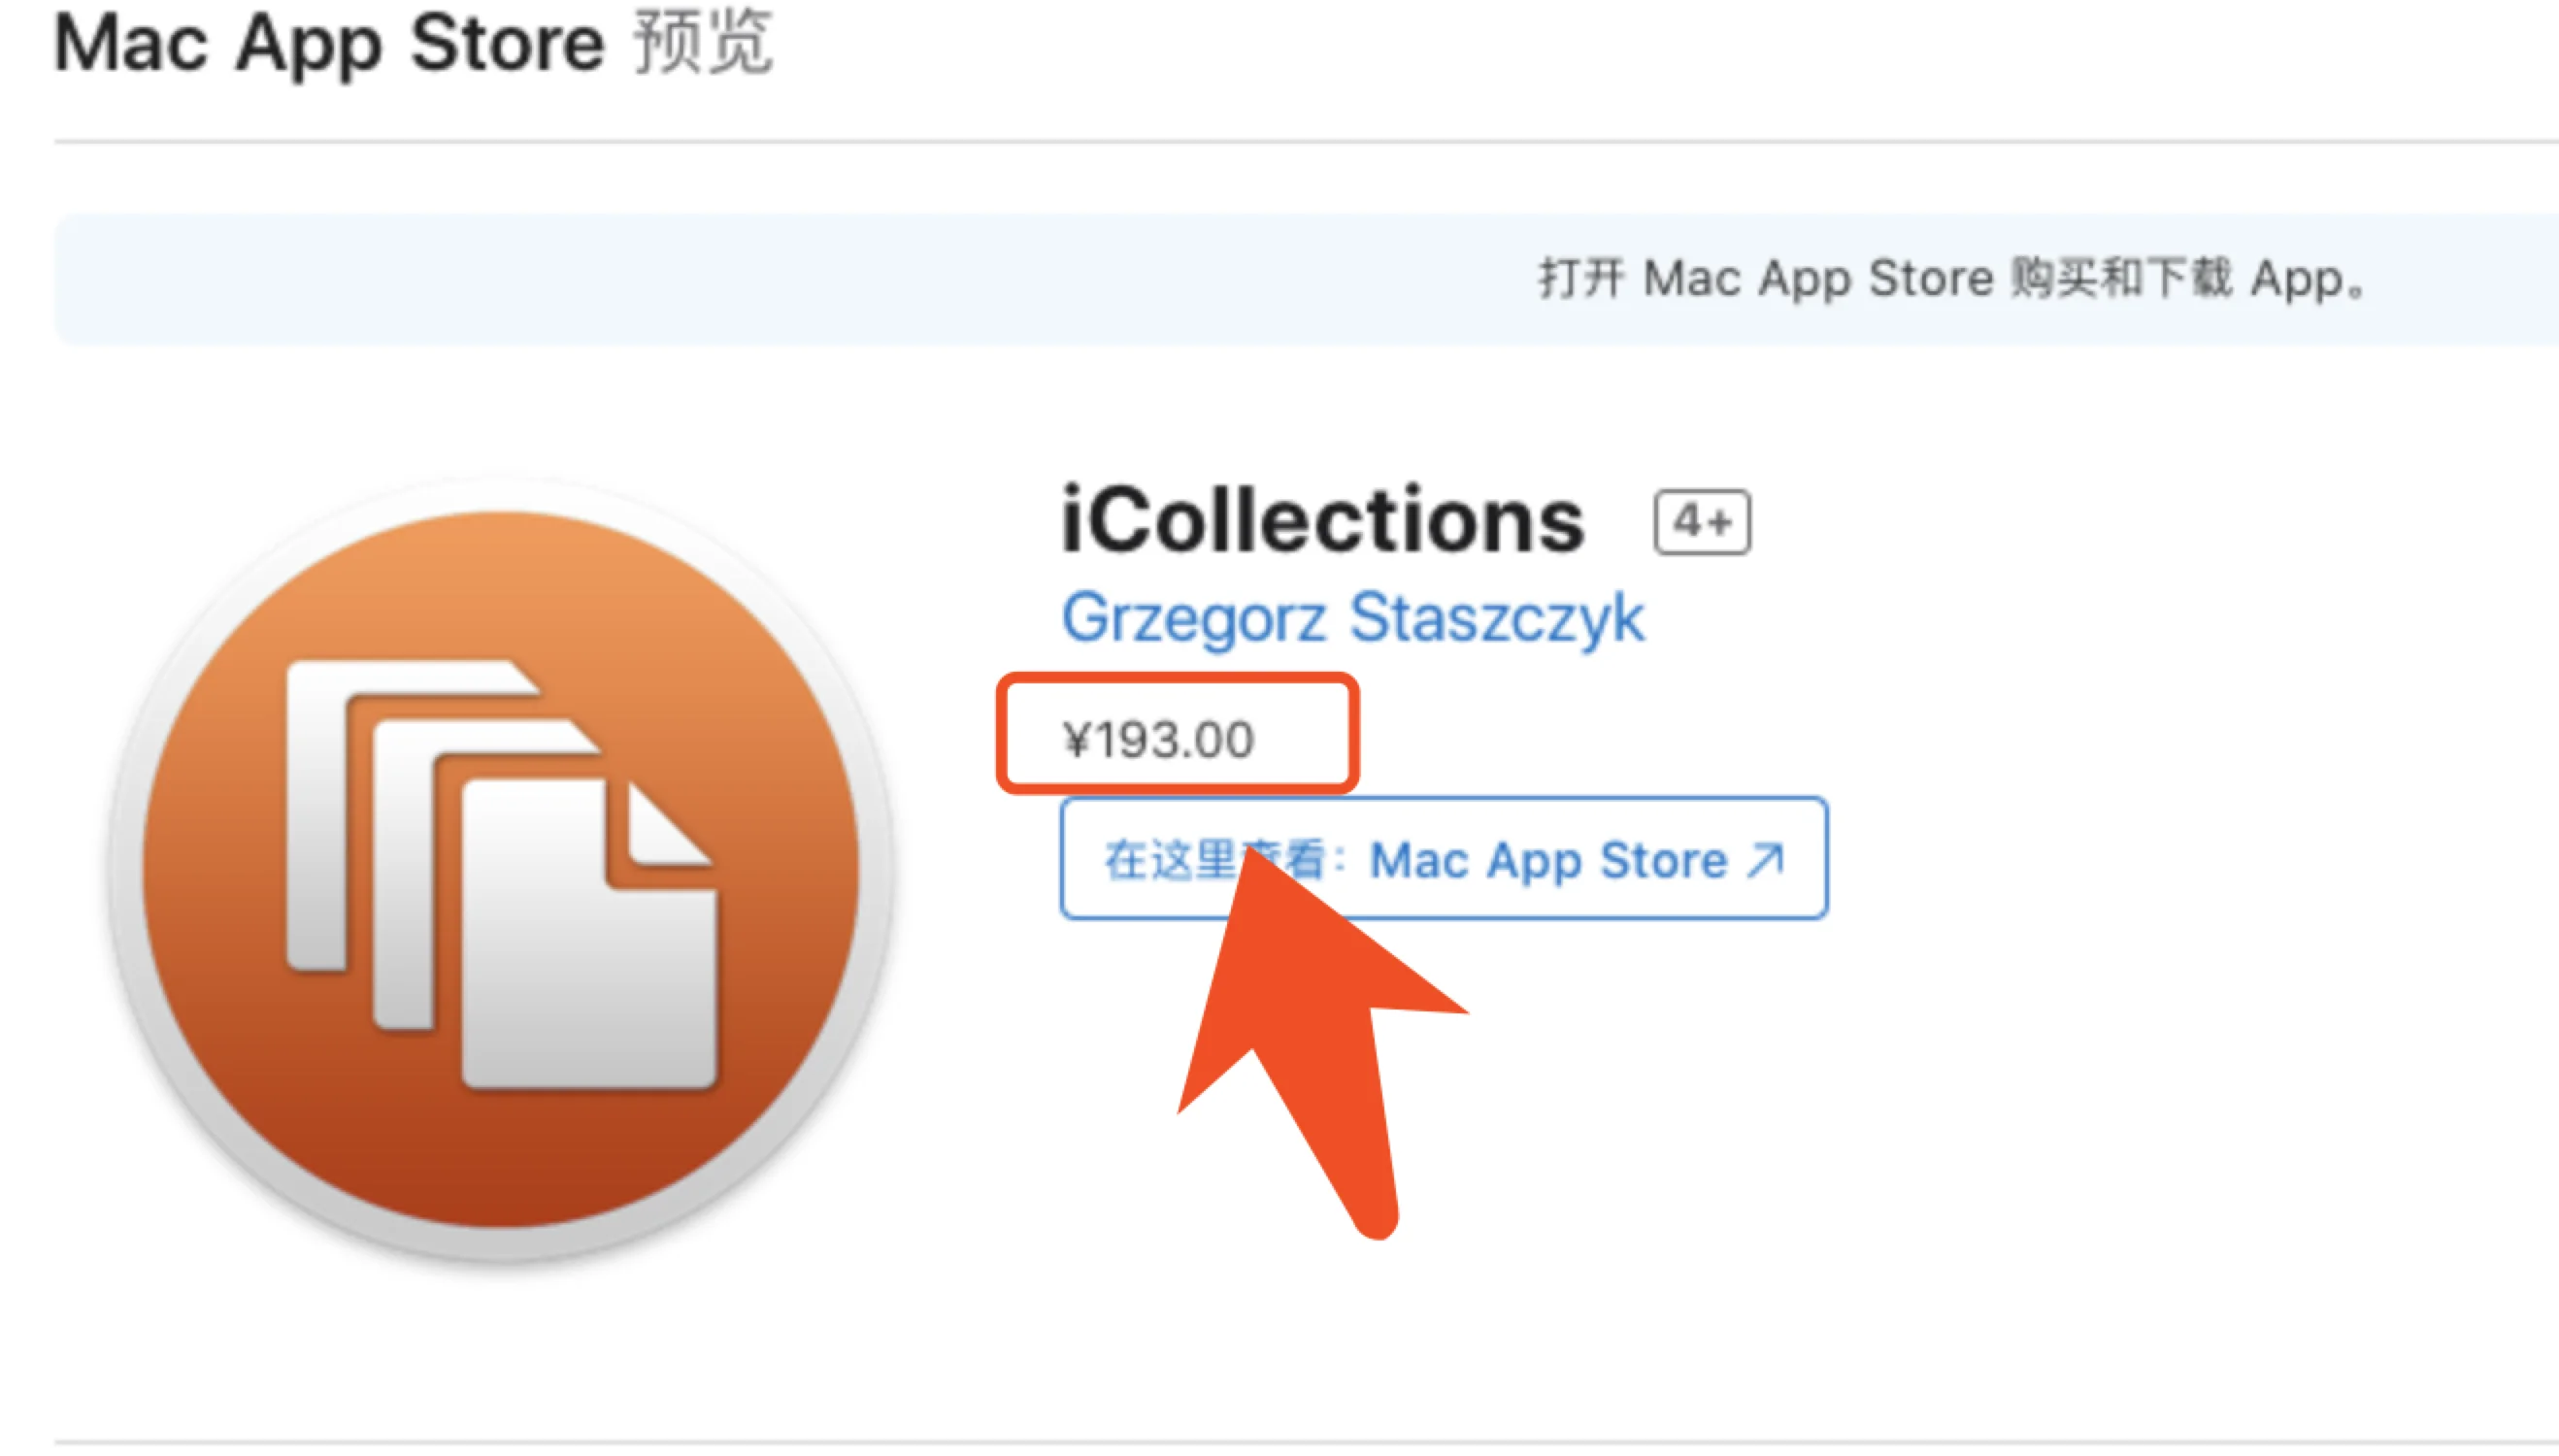 iCollections 6.4.3 (64311) 组织你的桌面图标-马克喵